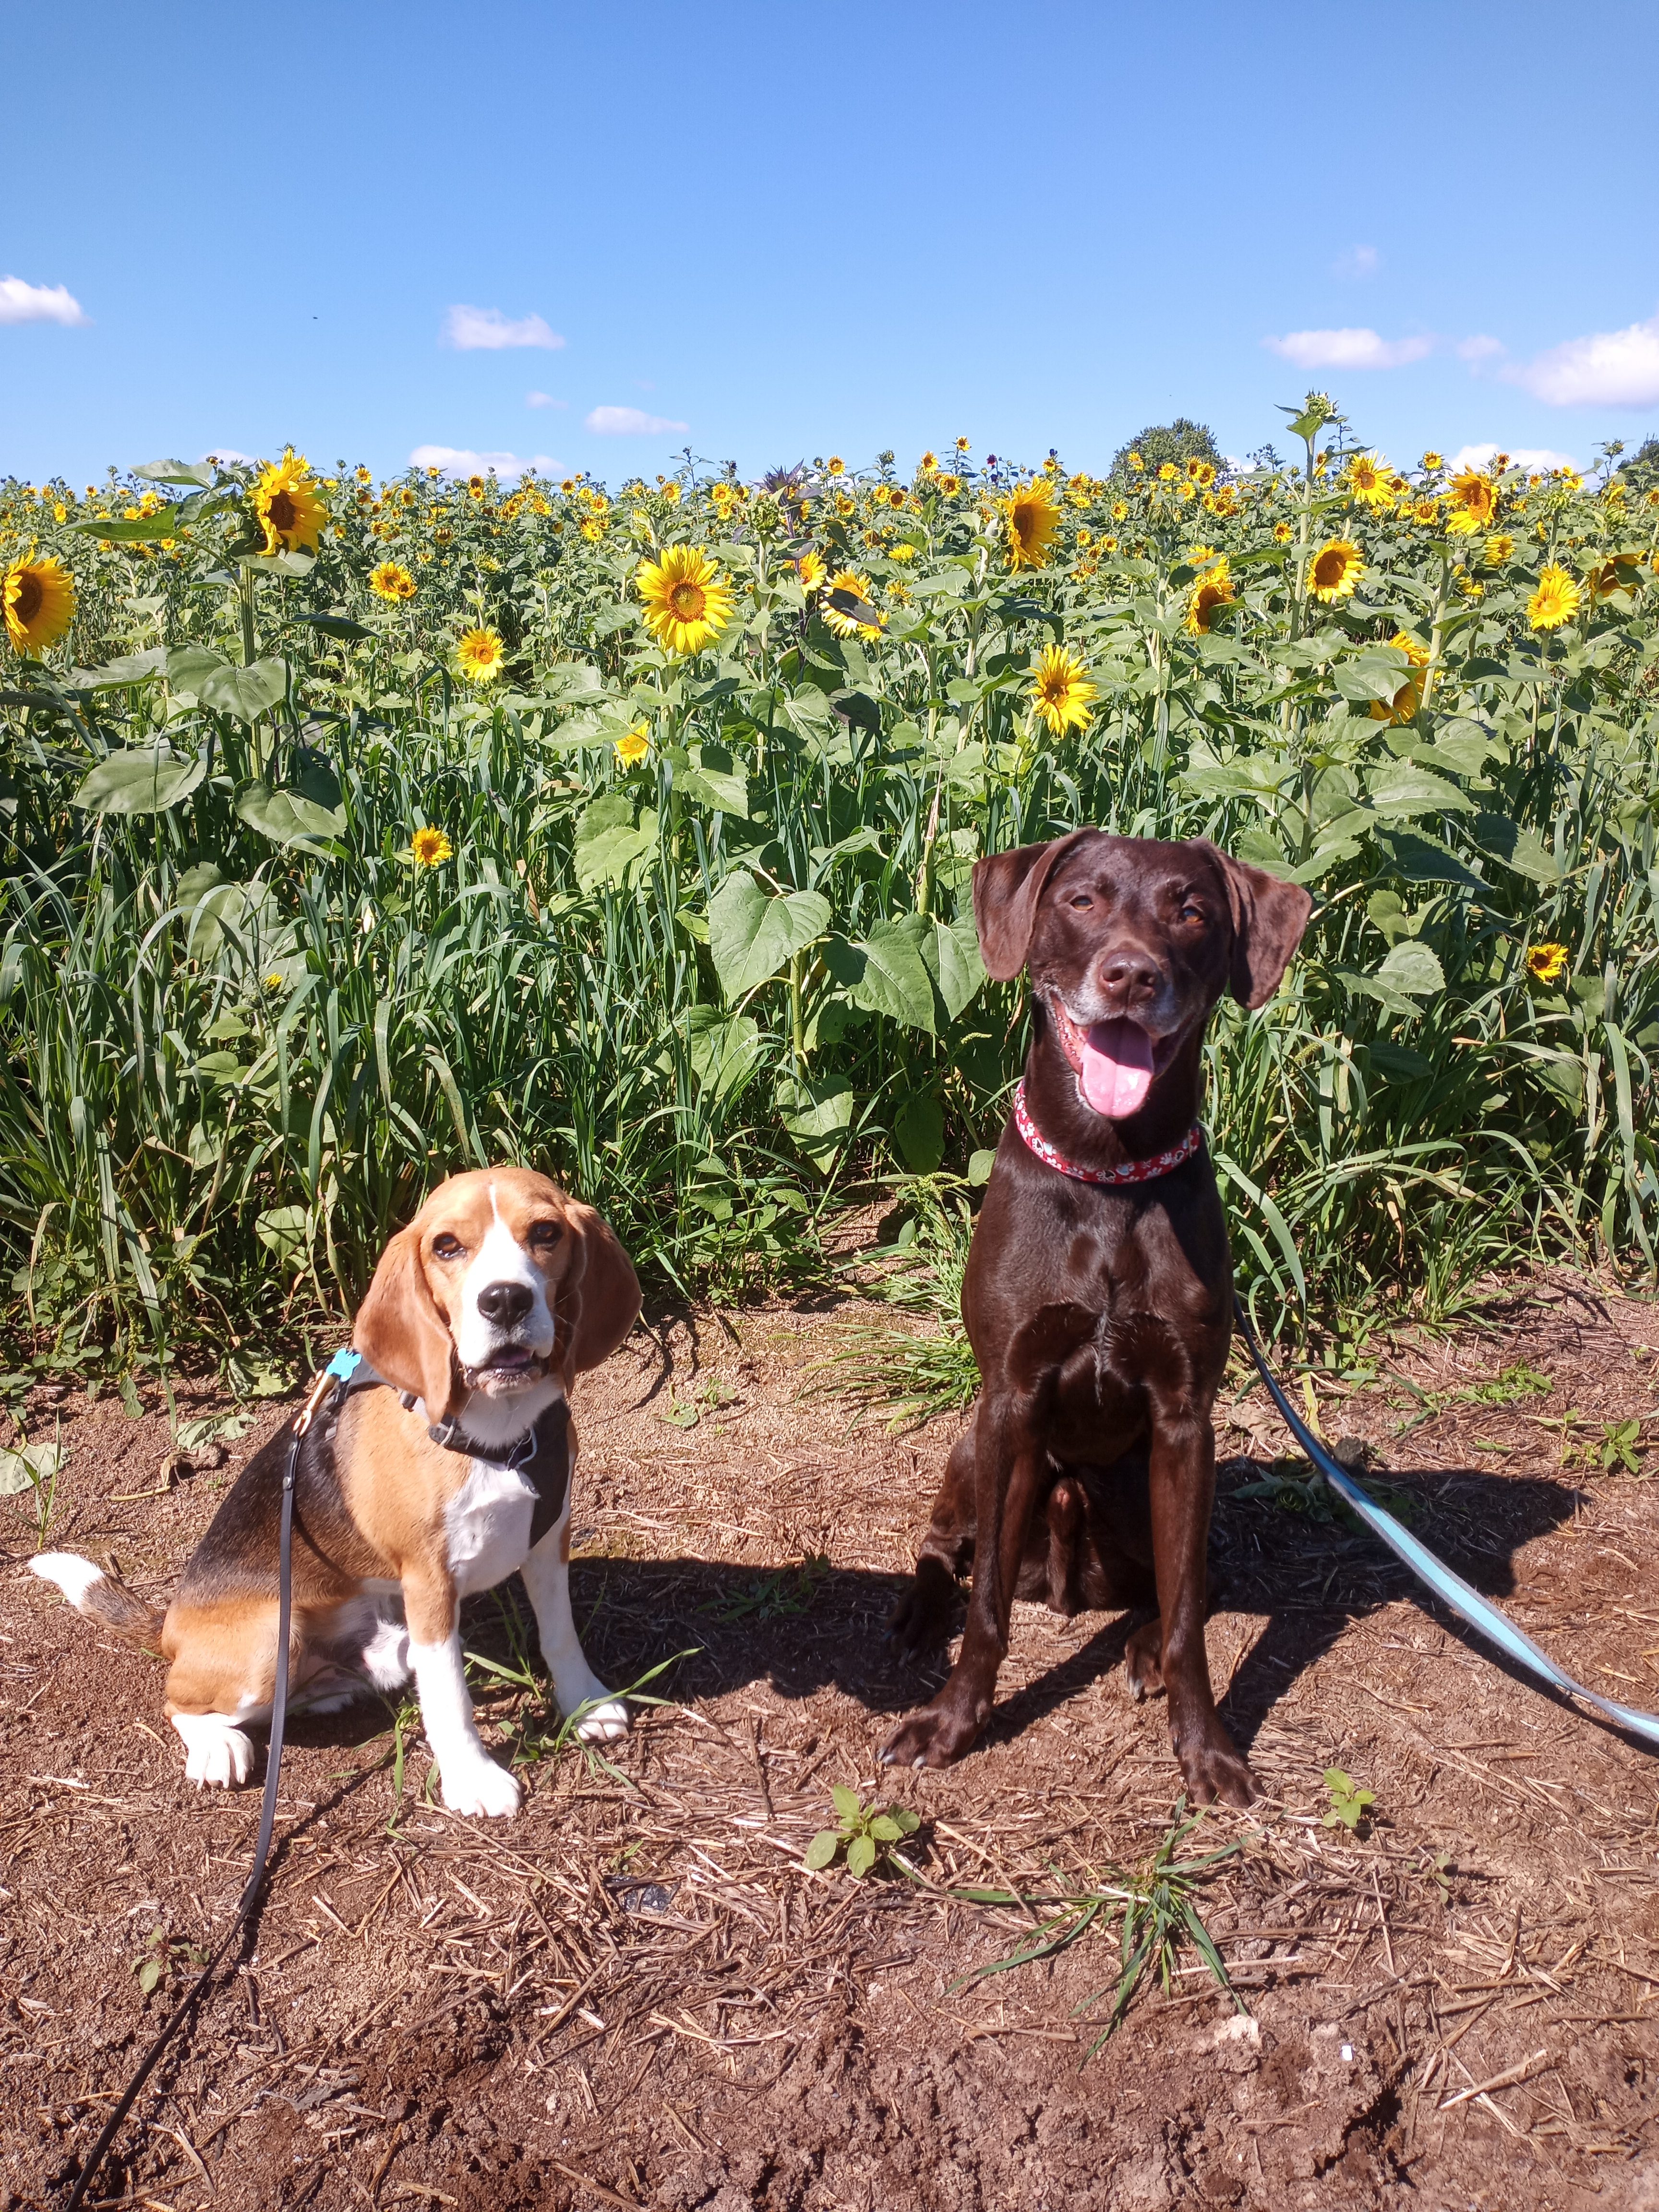 Two dogs sit together at a sunflower field